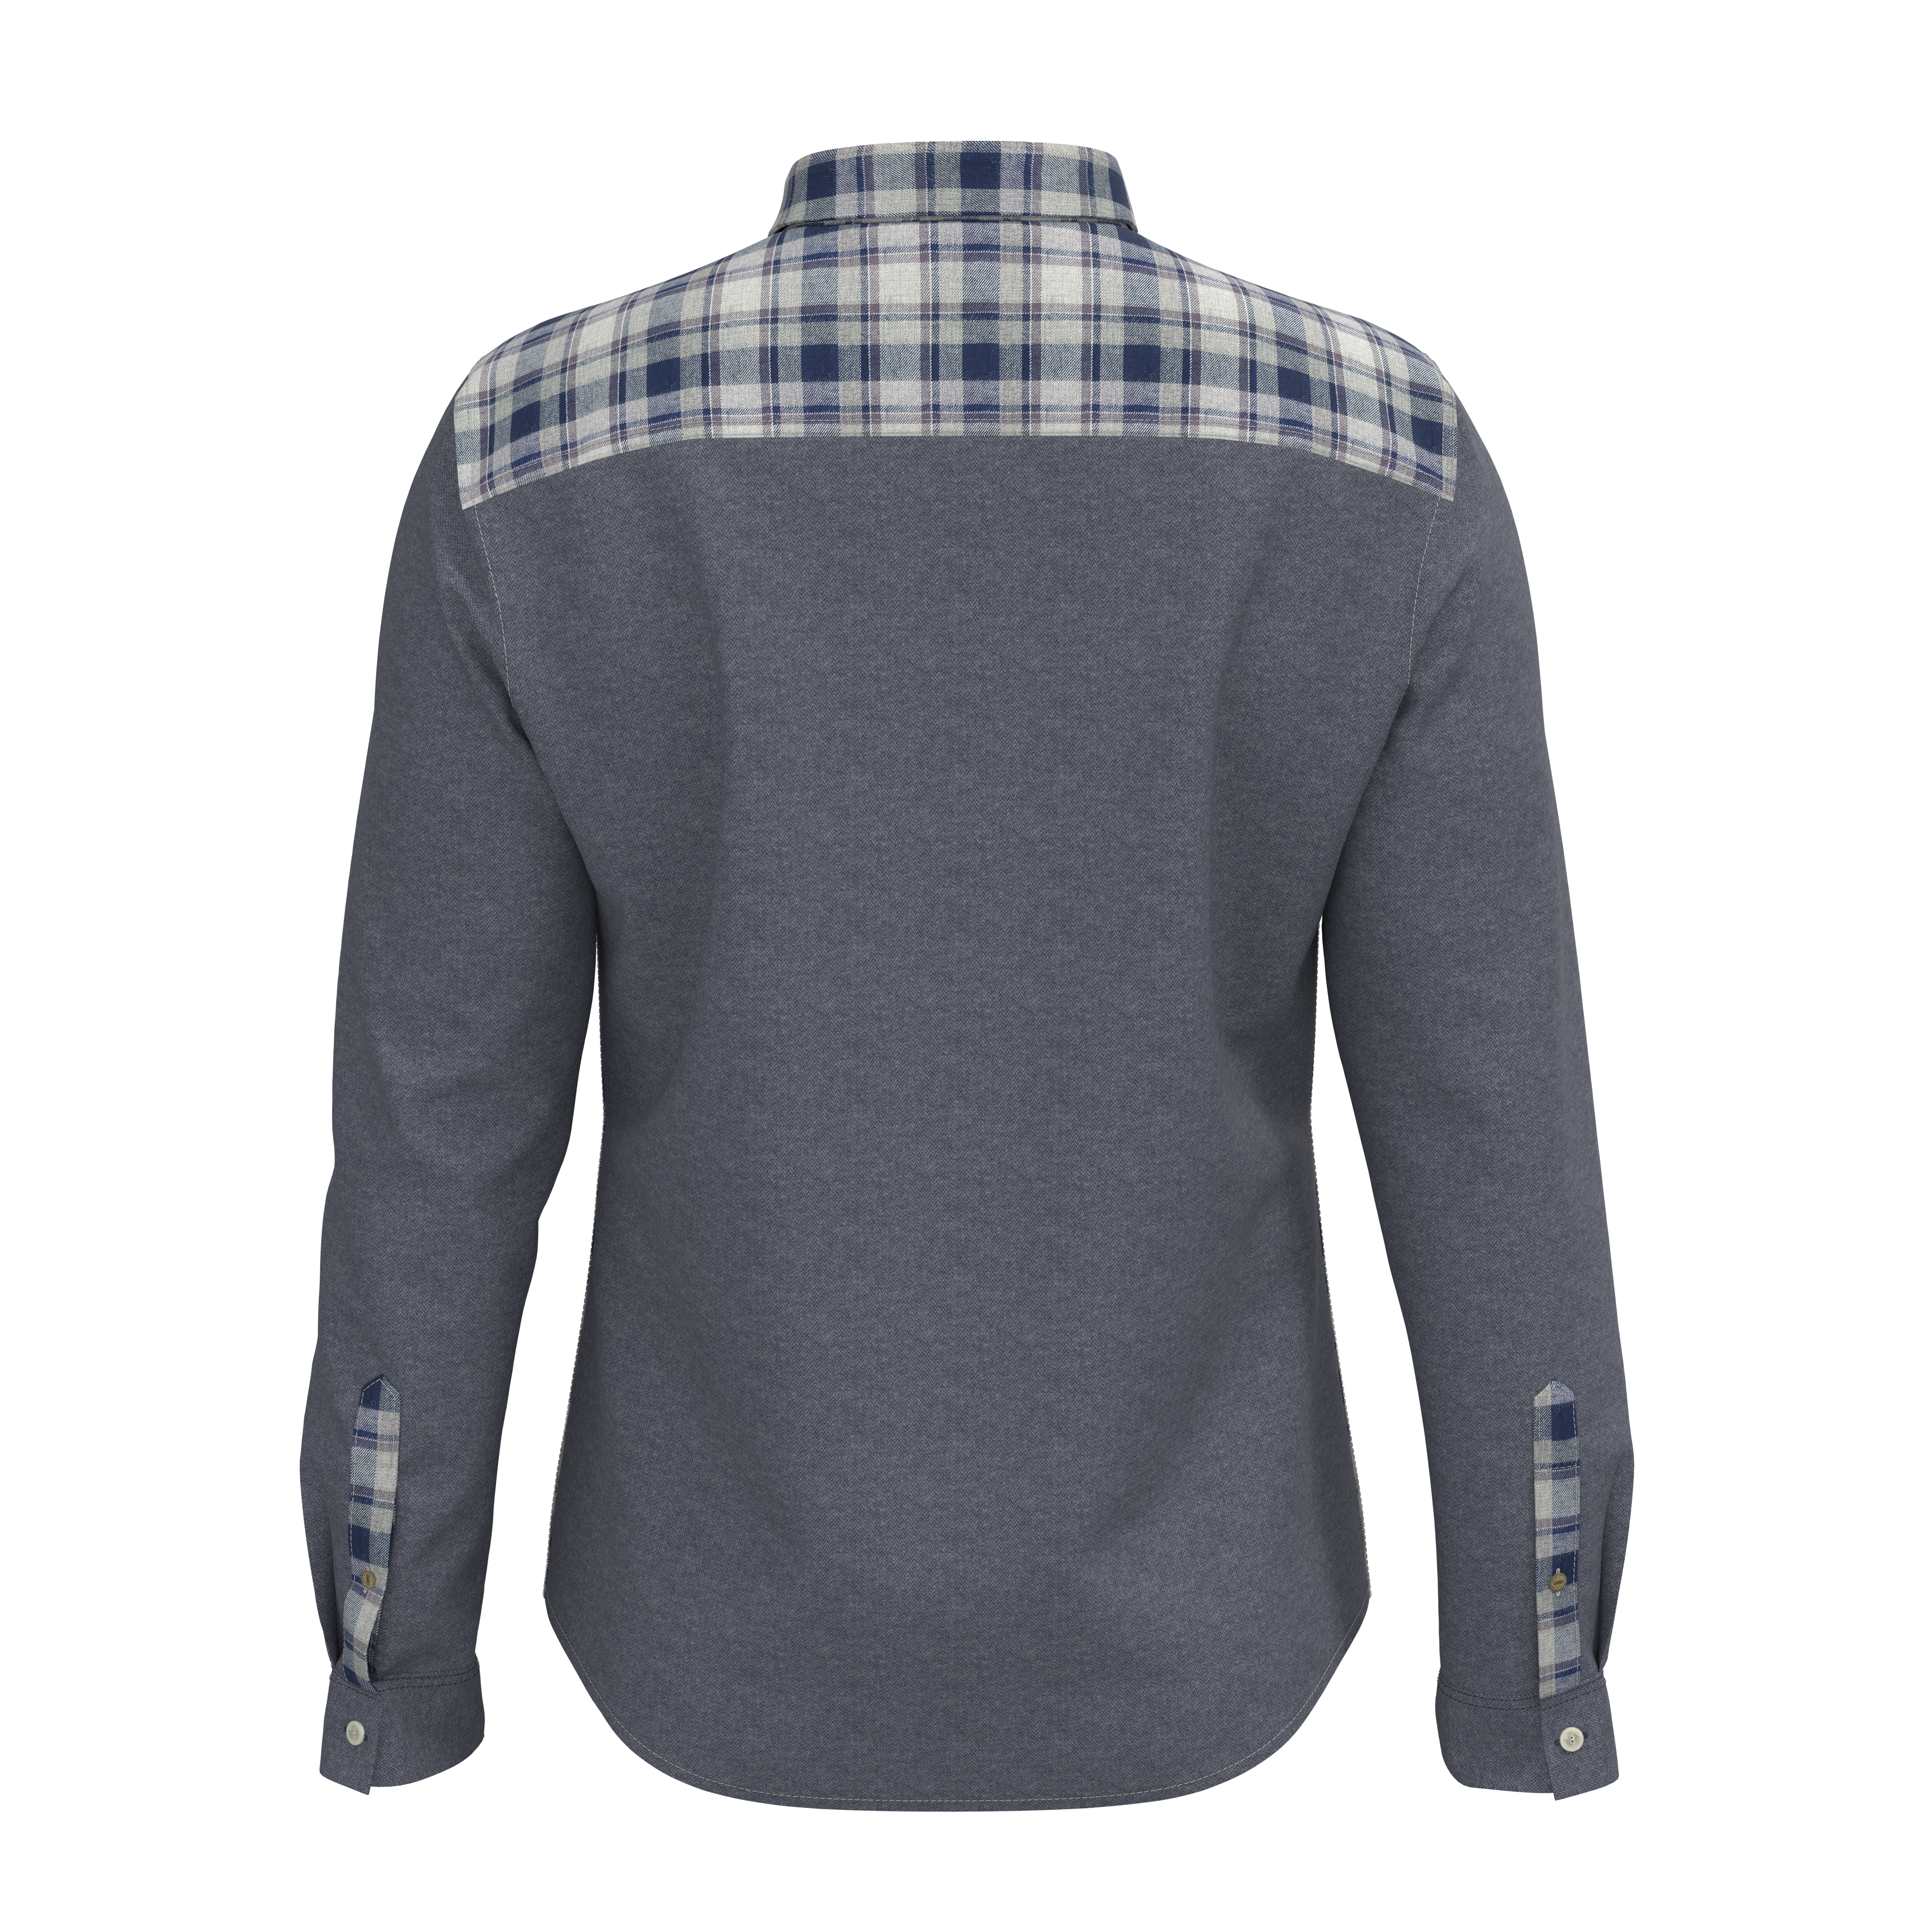 Checks Shirt With Contrast Long Sleeves